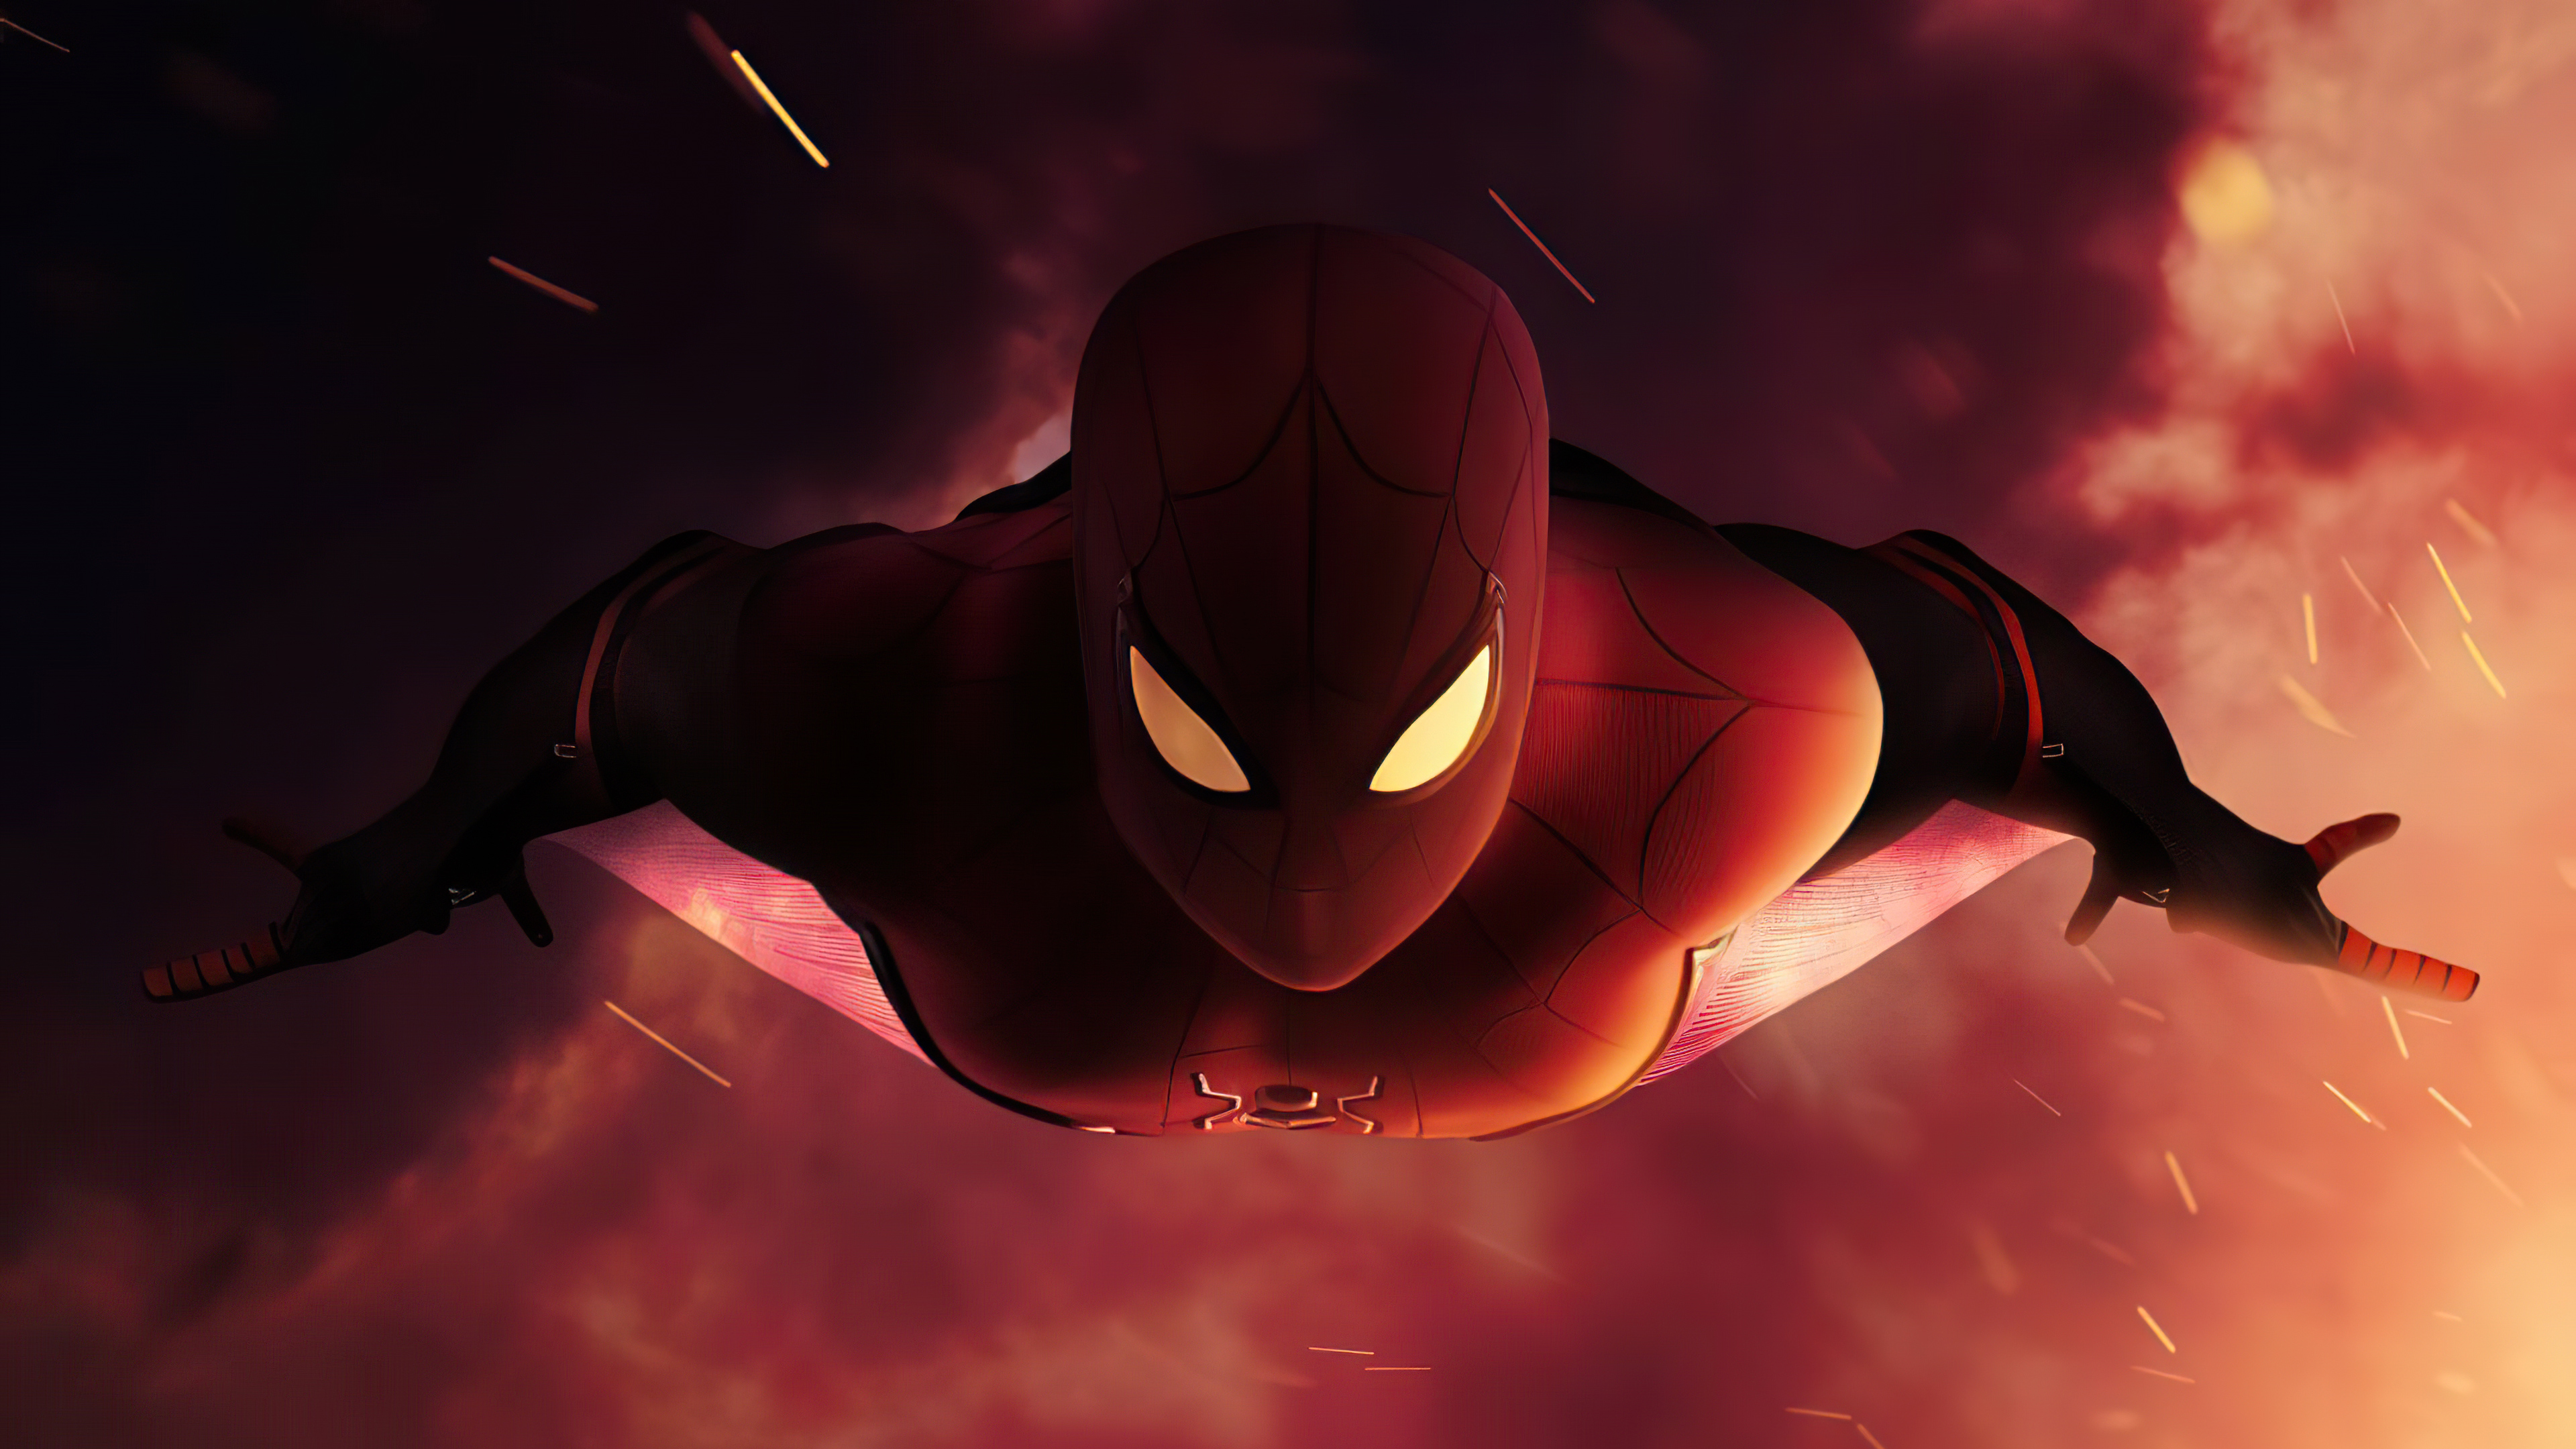 Spider-Man: Far From Home download the new for windows